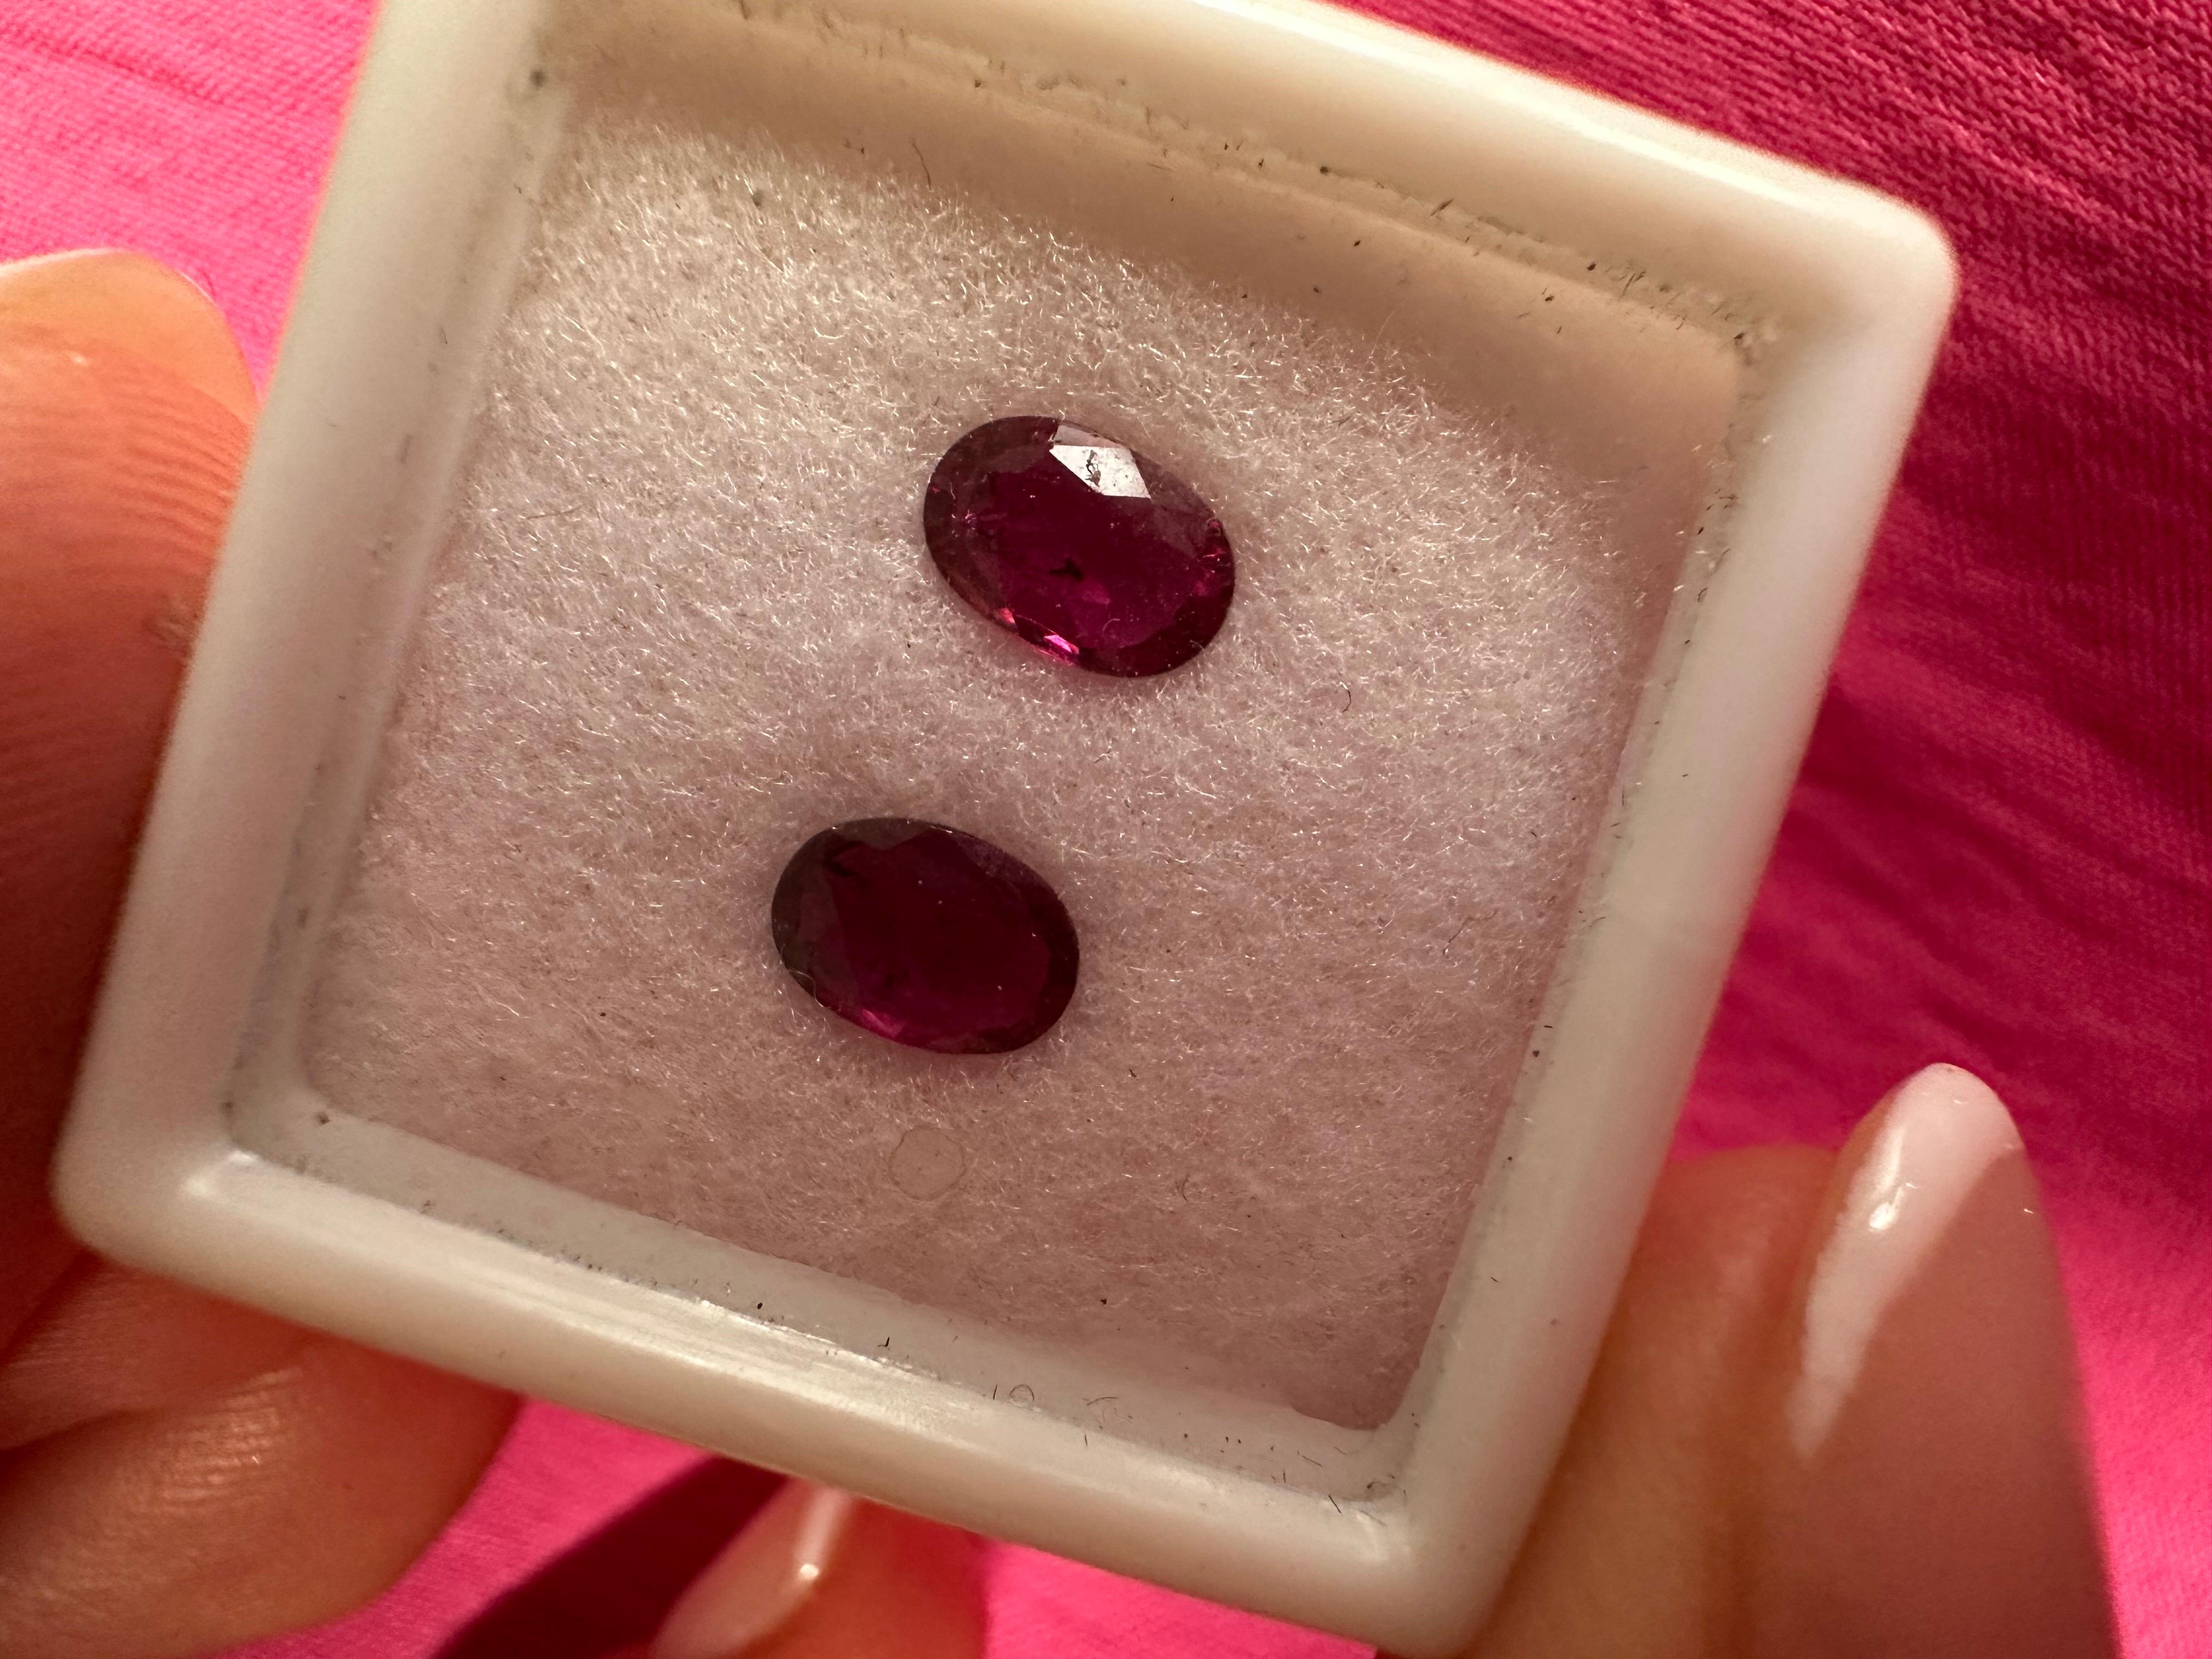 Rare matching pair of rubies, untreated and certified.

NATURAL GEMSTONE(S): NATURAL RUBY 
Clarity/Color: Slightly Included/Pinkish Red
Cut: Rectangular 9.2mmx7mm
Treatment: none
RPK


WHAT YOU GET AT STAMPAR JEWELERS:
Stampar Jewelers, located in